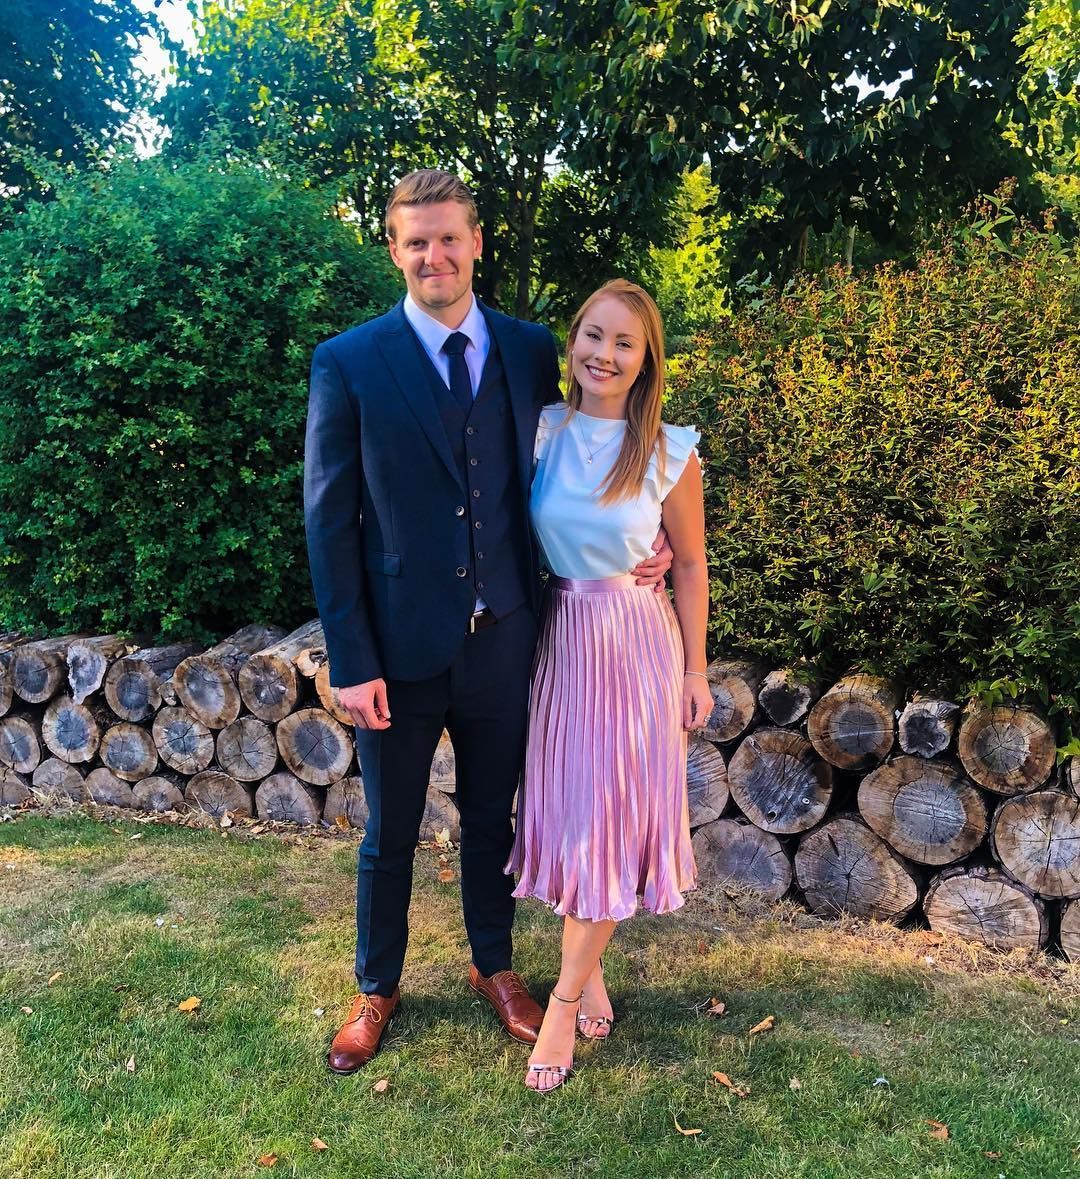 We absolutely love seeing your photos from your time at Cadbury House. 💘 Remember to tag us so we can reshare all of these lovely moments! 📸 sthreaderr on IG. #Bristol #BristolWeddings #CadburyHouse #Spring #Warm #Couple #DaysOut #Celebrate #Springtime #Love